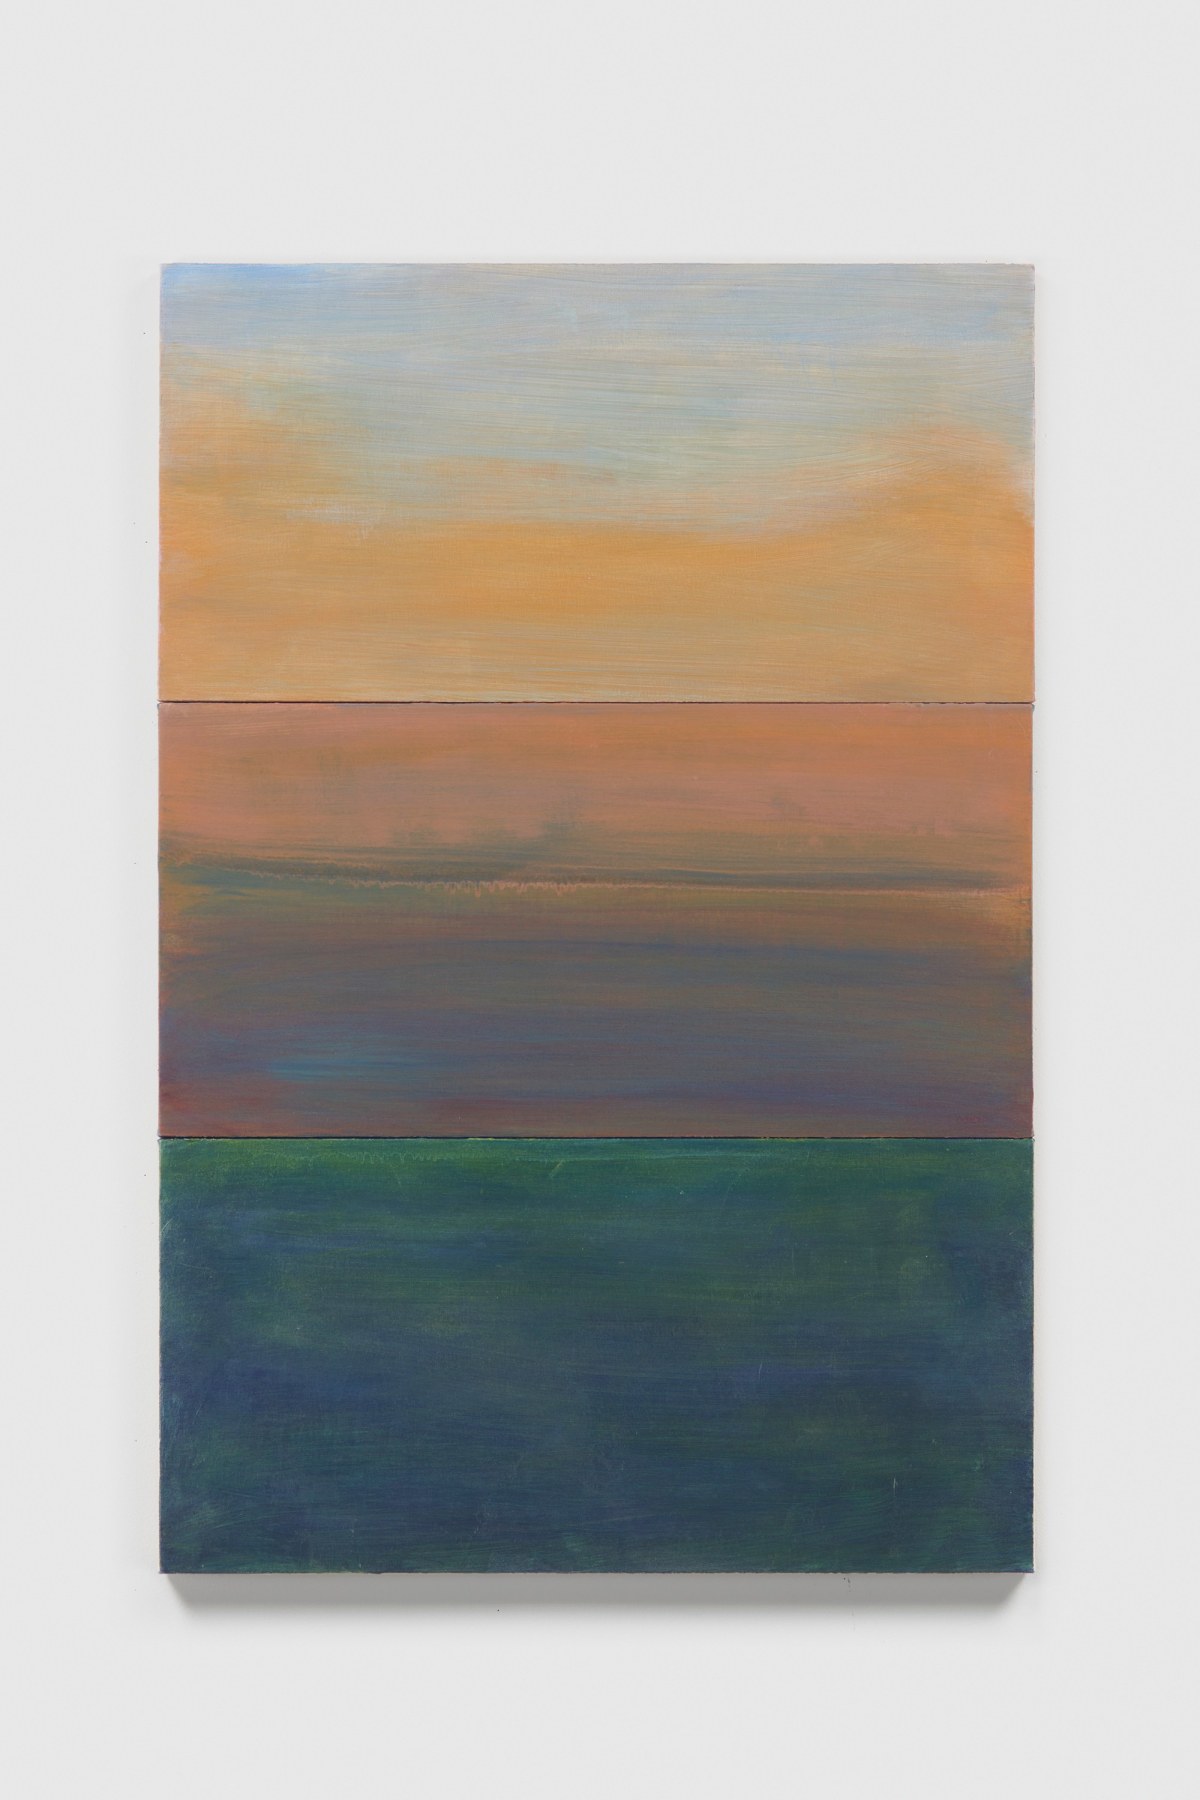 A three sectioned painting depicting the sunset in baby blue and orange, the ocean in pink and an abstract pattern in dark green